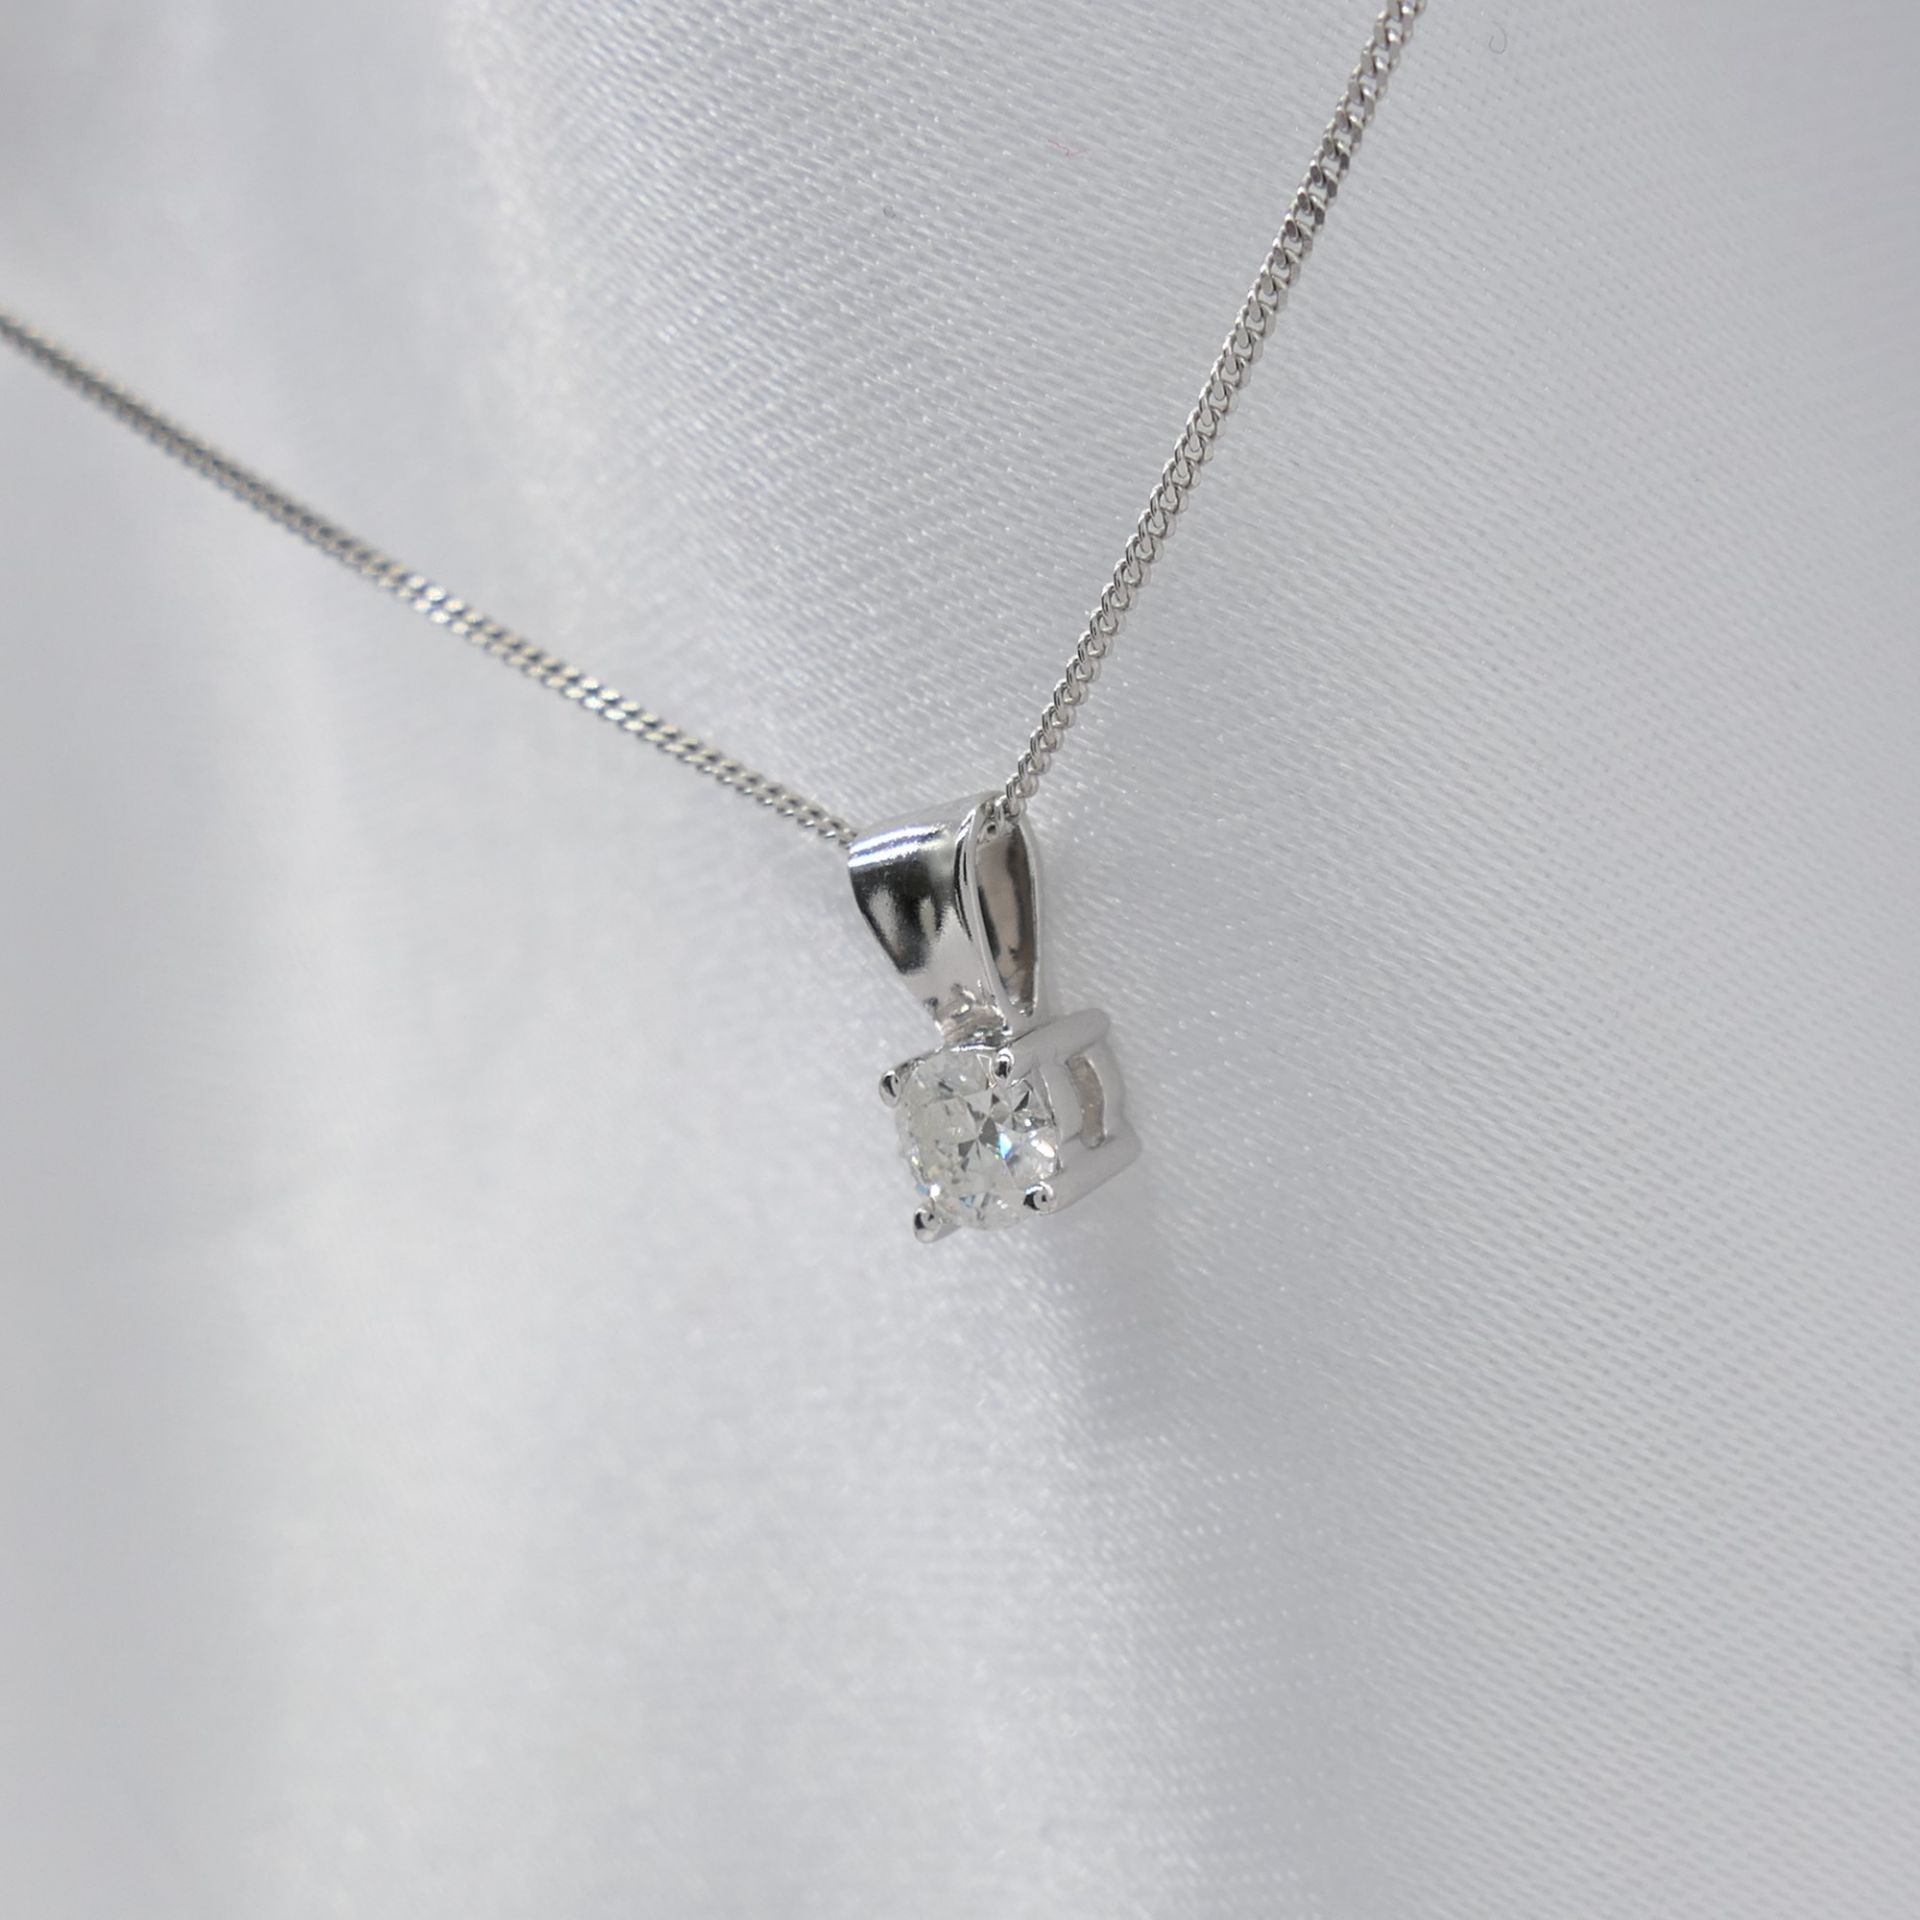 0.15 carat diamond solitaire necklace in white gol - Image 7 of 8